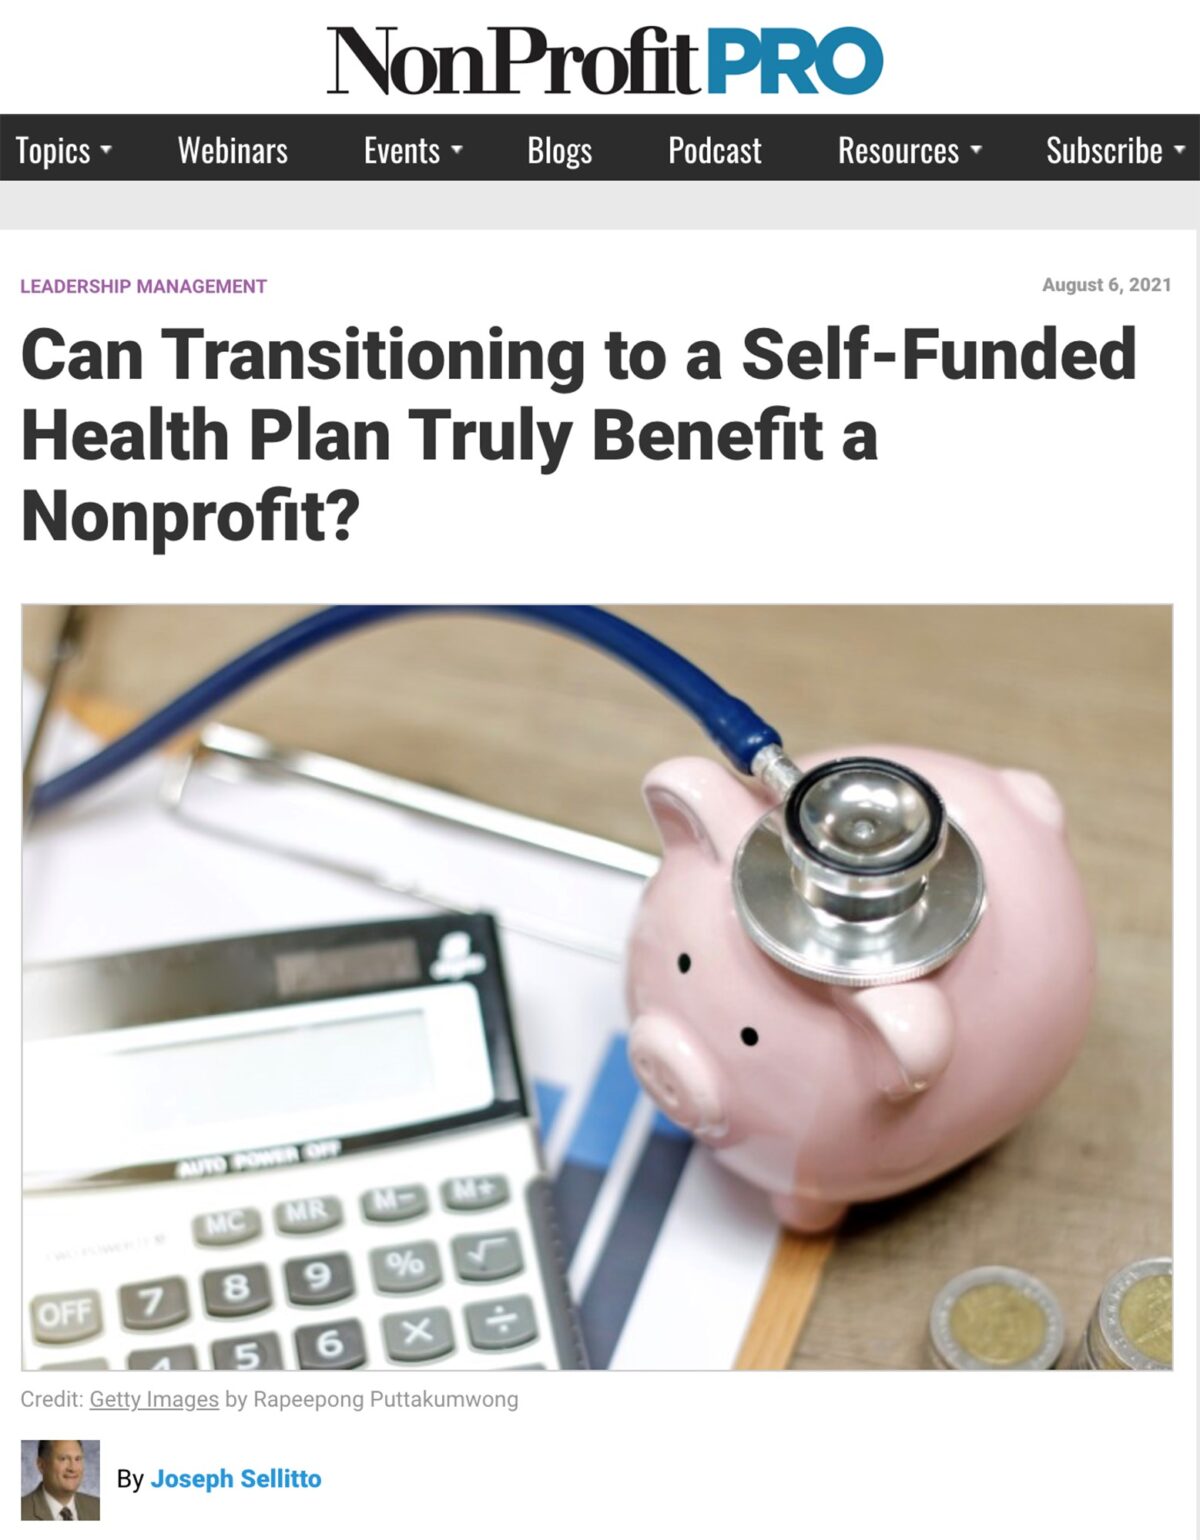 SVP Joe Sellitto Pens an Article on Self-Funded Plans for NonProfit PRO